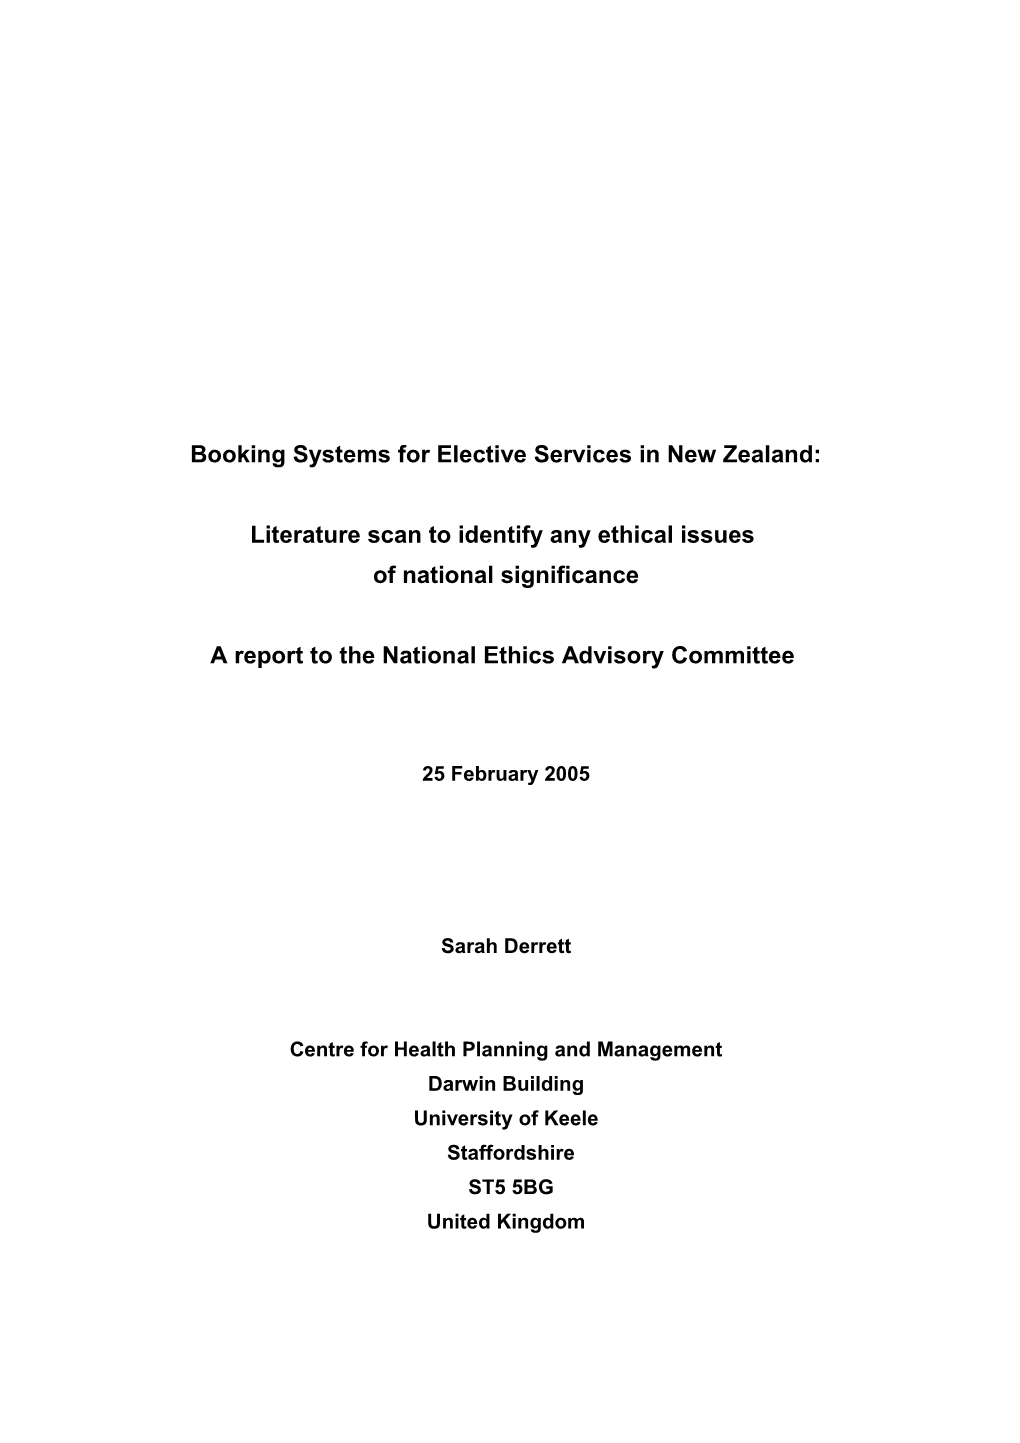 Booking Systems for Elective Services: a Literature Scan to Identify Any Ethical Issues